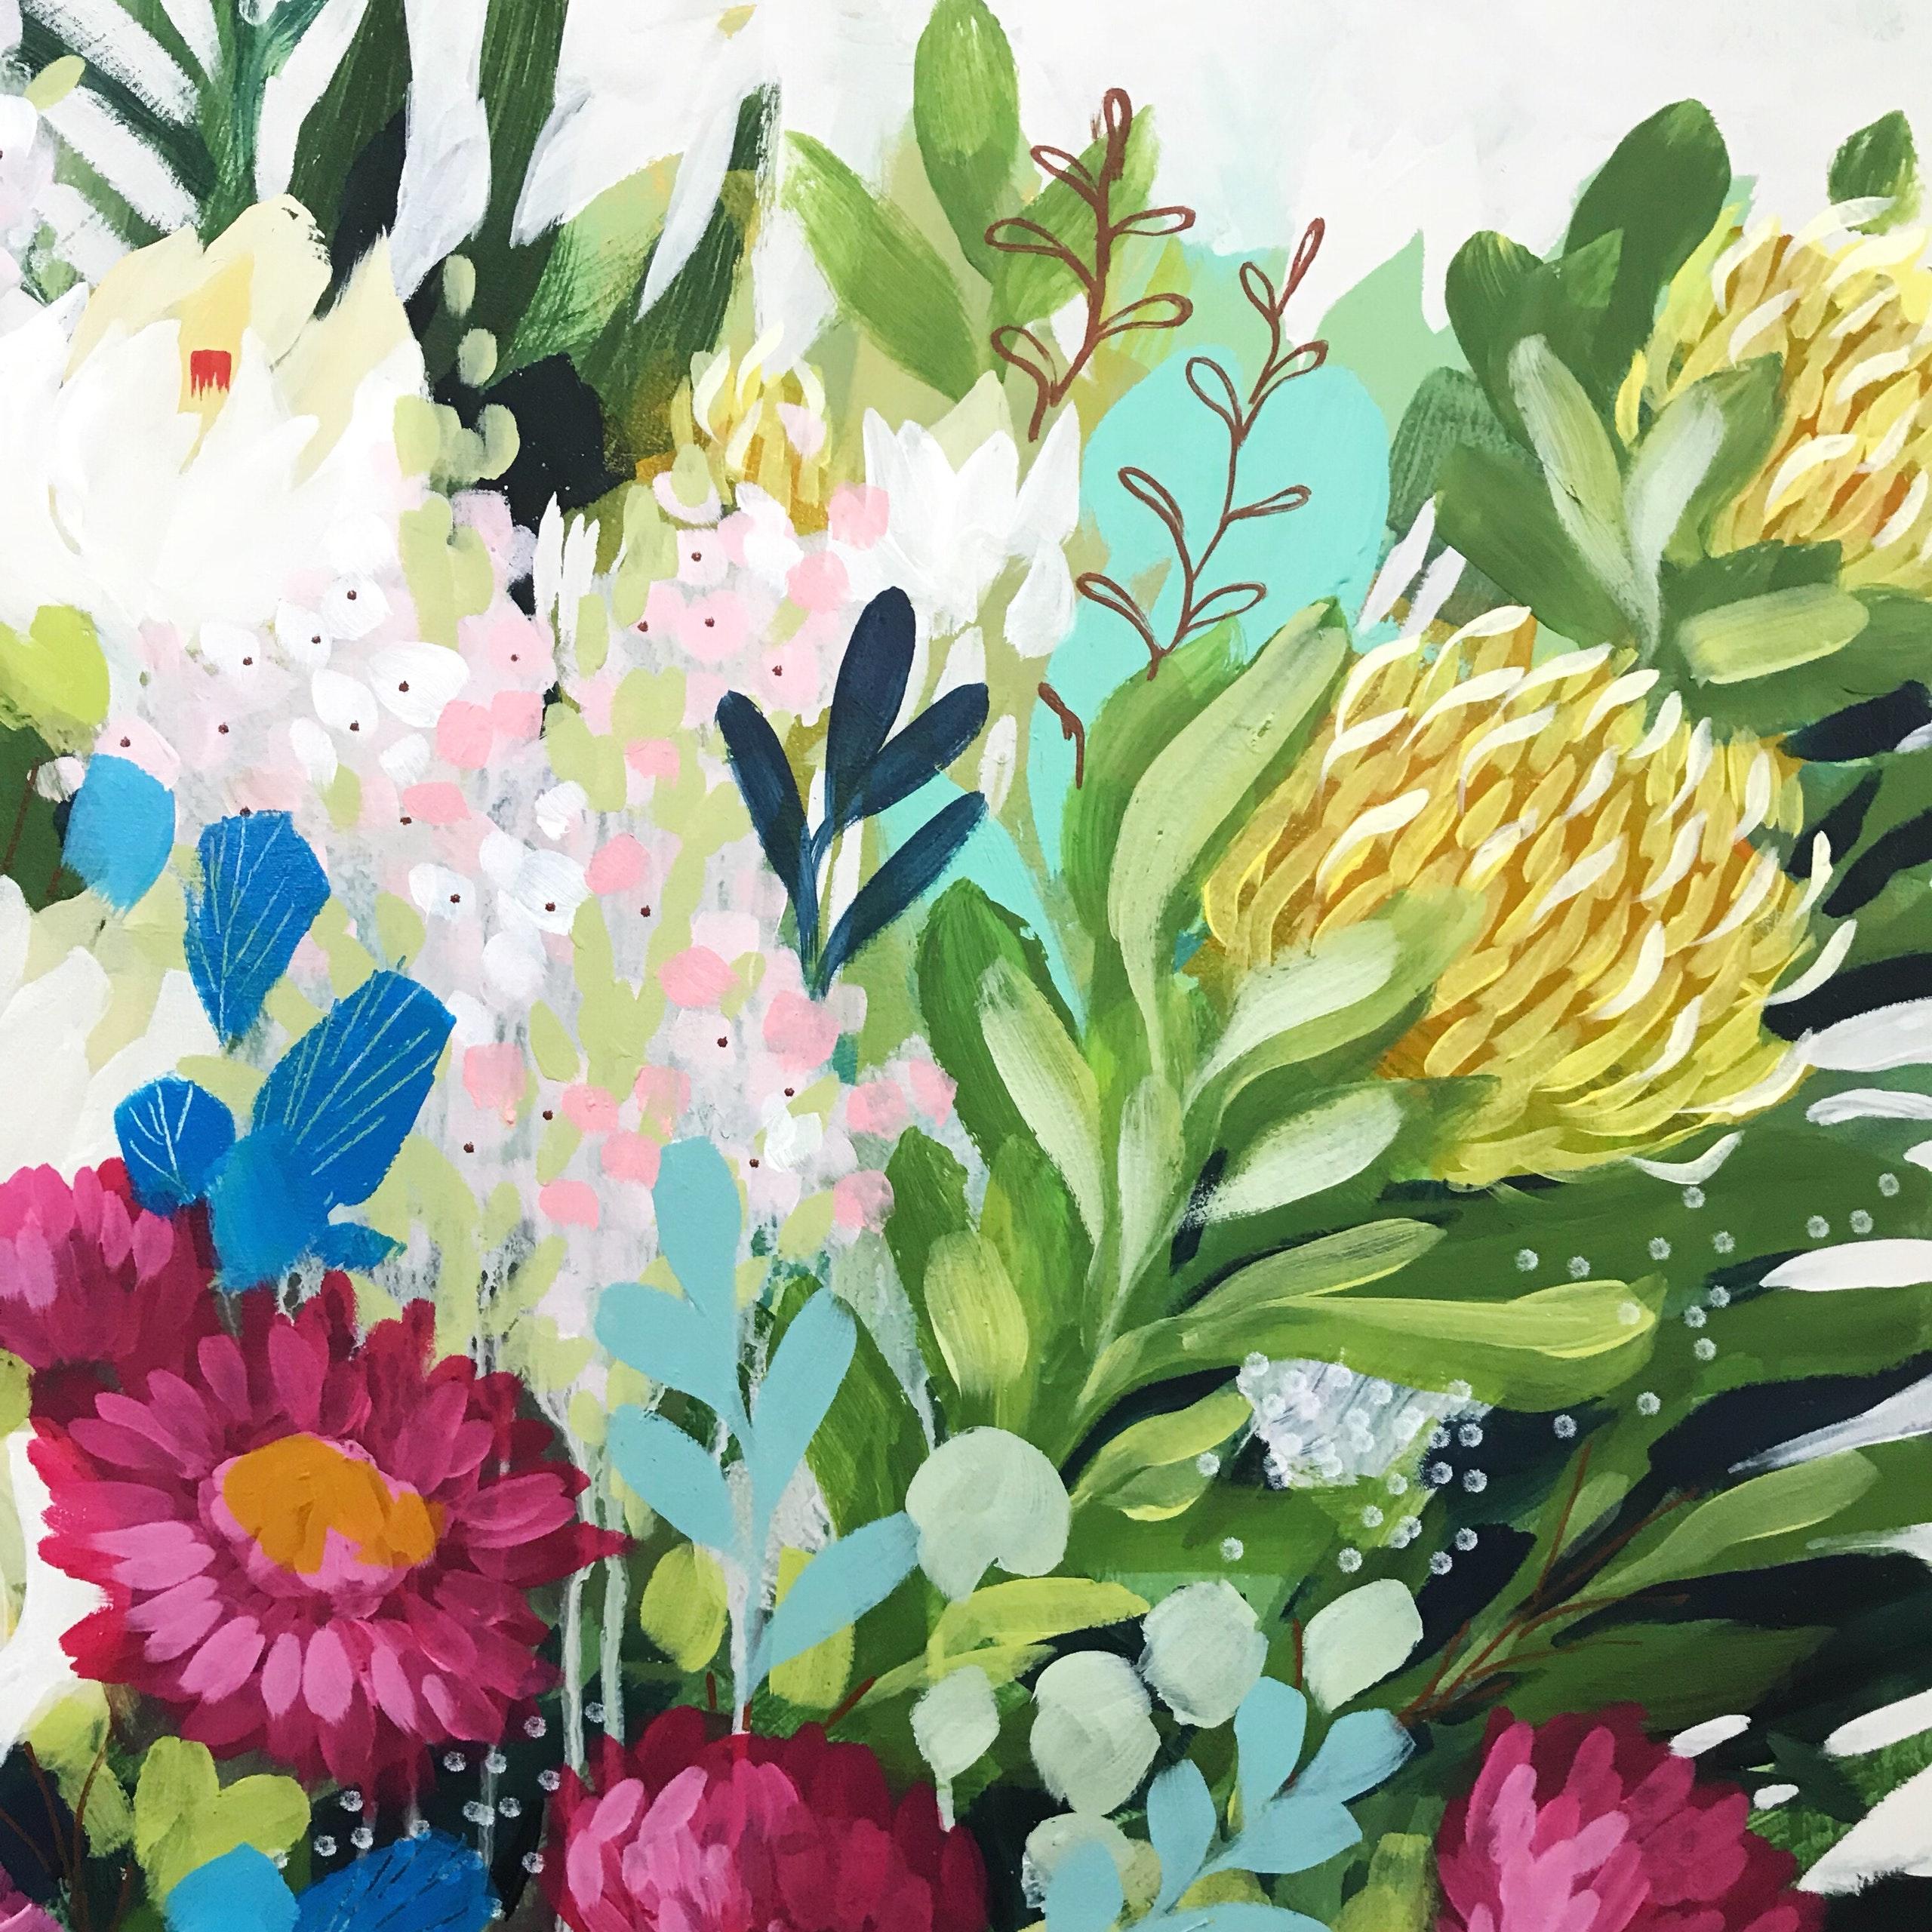 Paper Daisies and Protea 2 by Clair Bremner. Acrylic on canvas. Ready to hang. 2